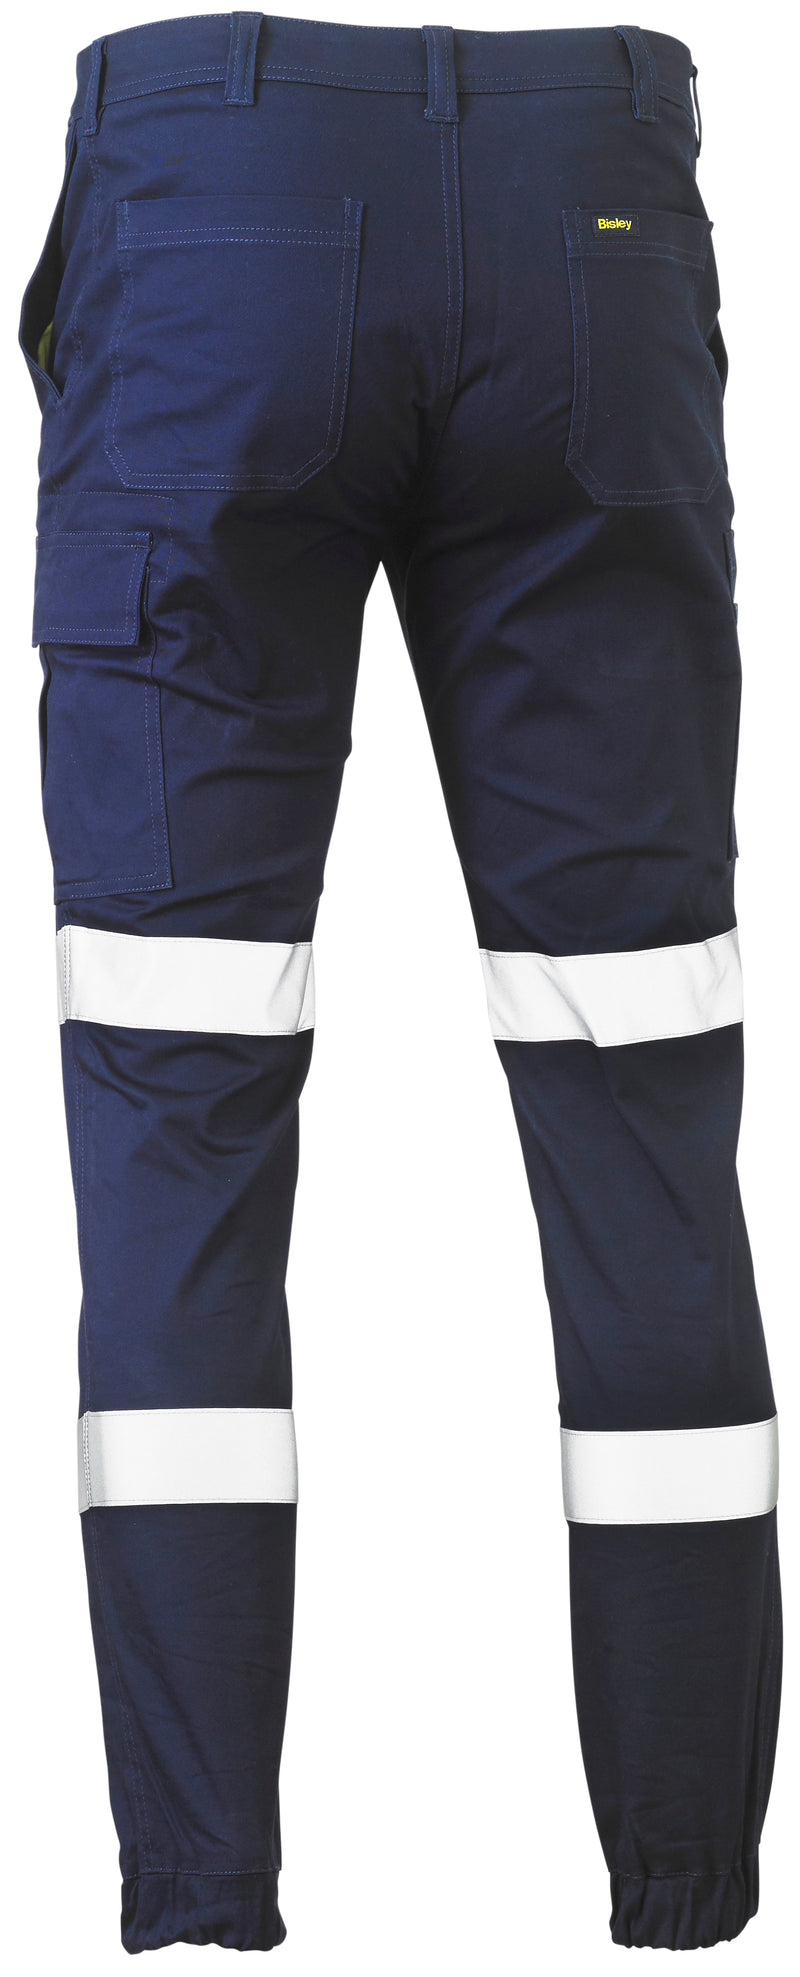 Load image into Gallery viewer, Wholesale BPC6028T Bisley Taped Bimotion Stretch Cotton Drill Cargo Pants - Stout Printed or Blank
